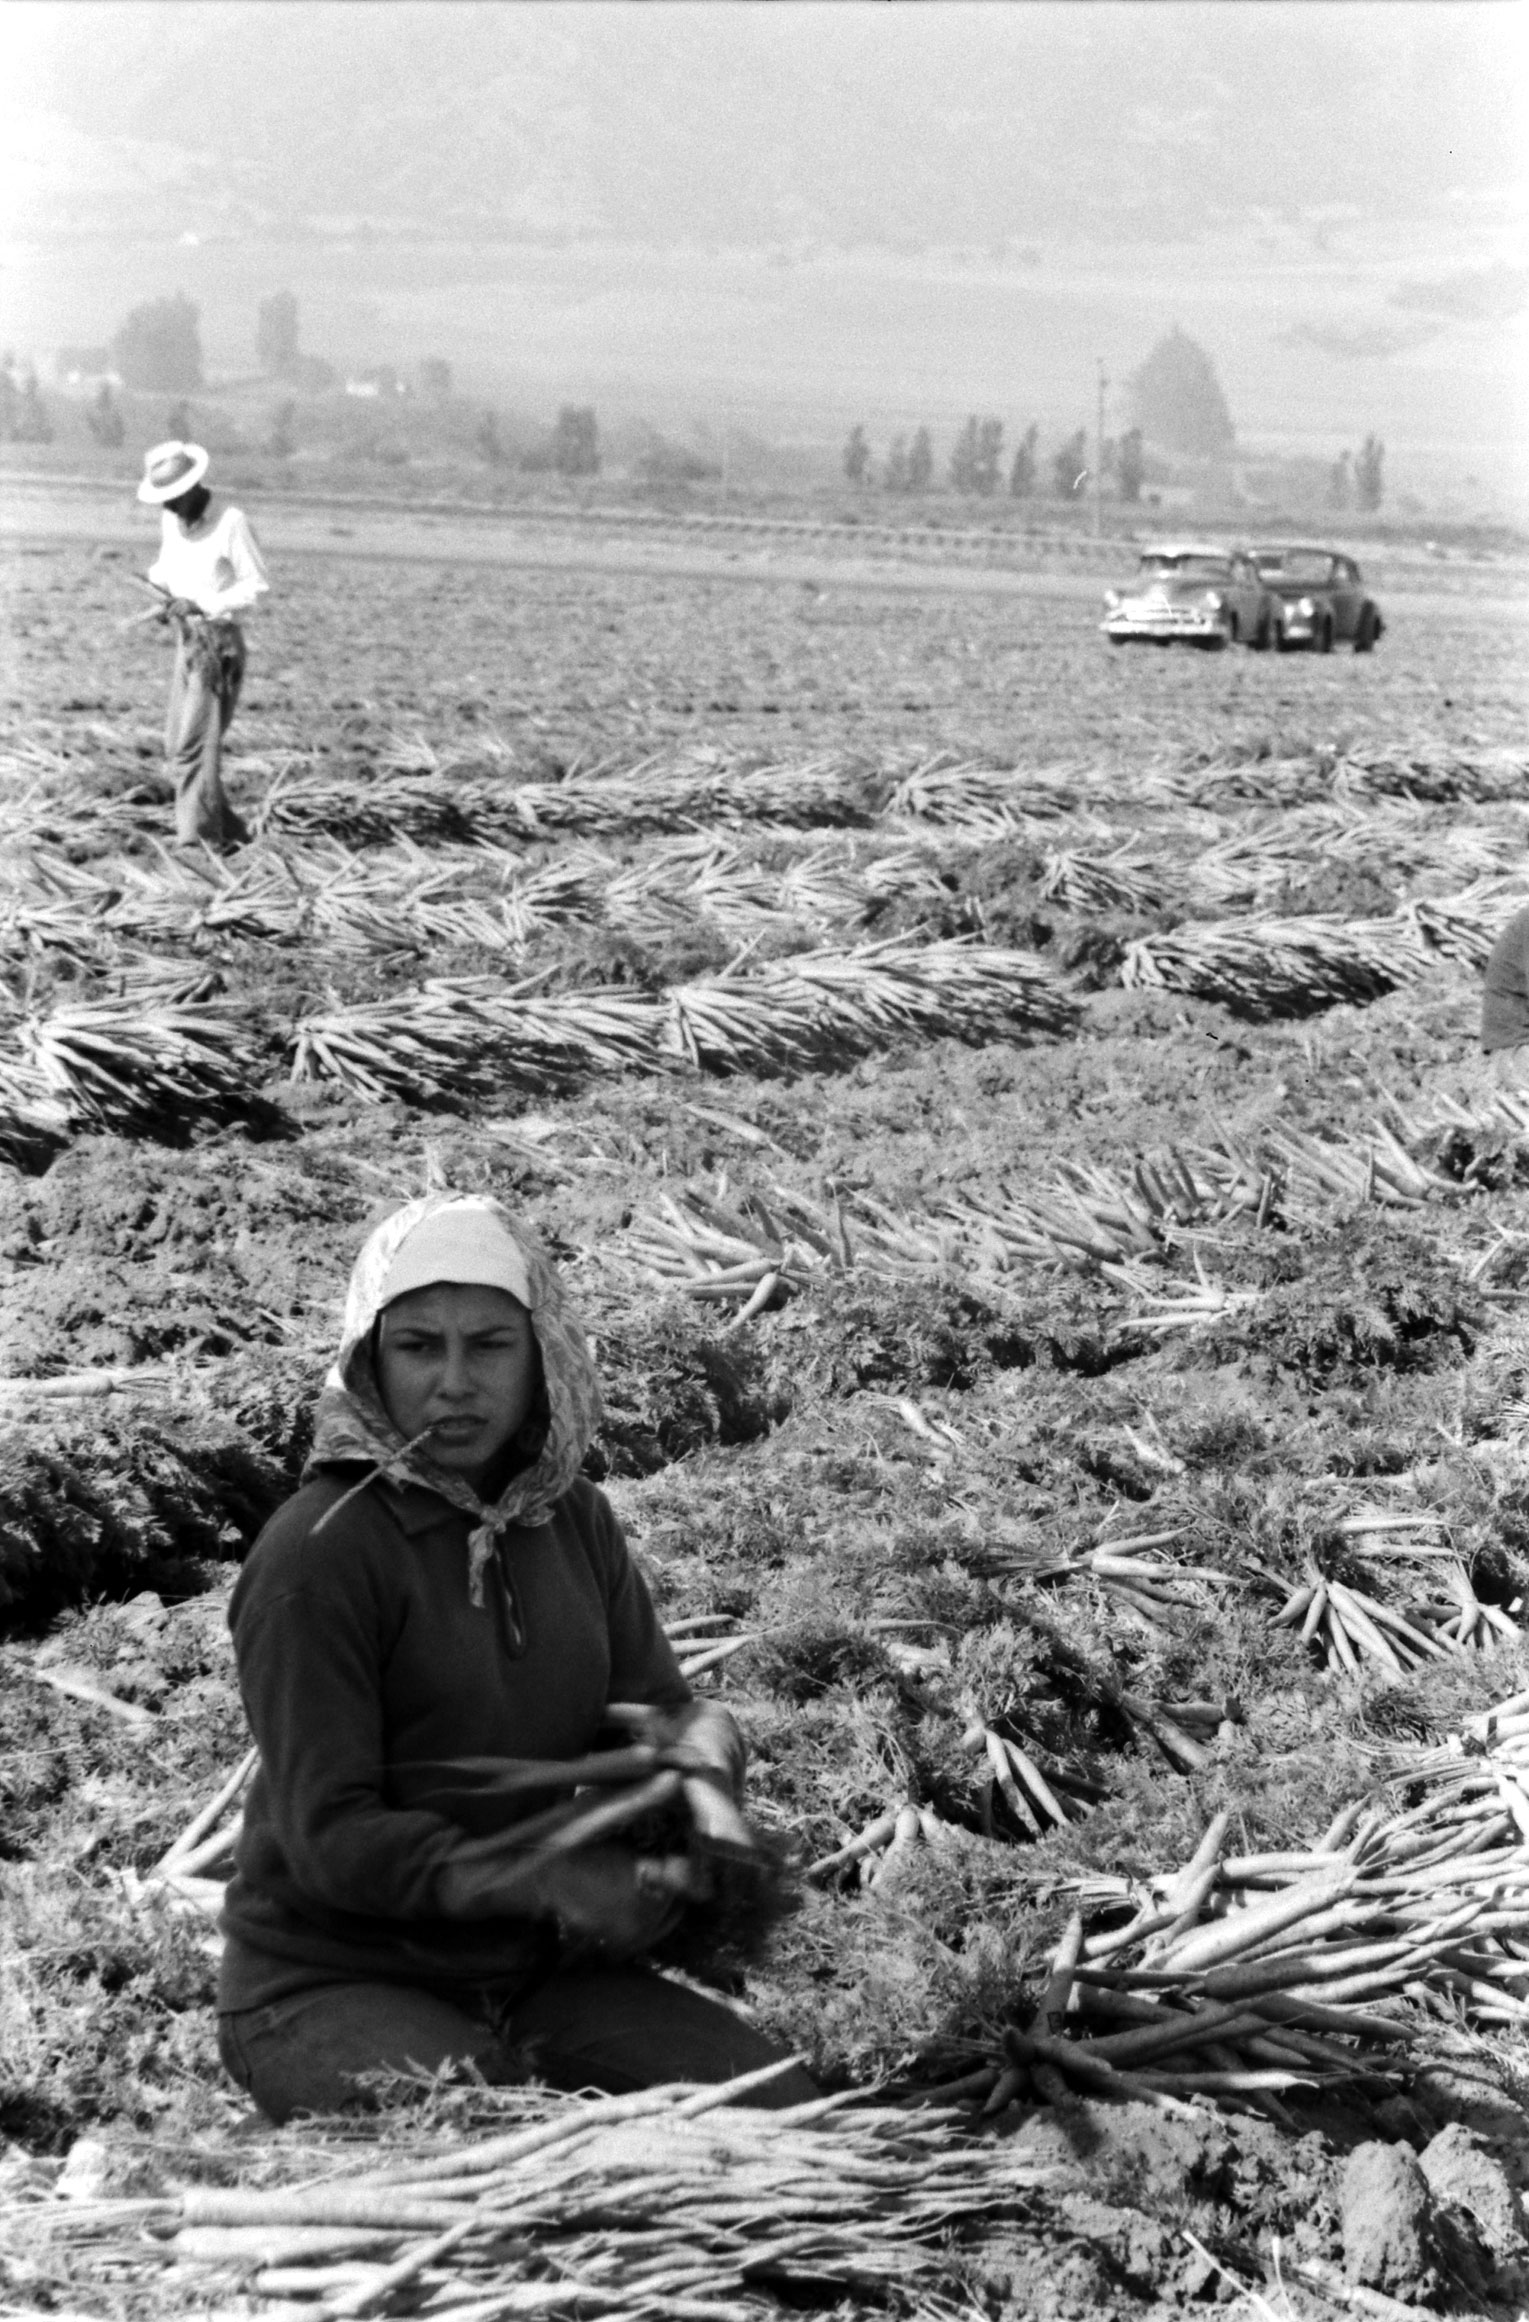 Migrant farm workers picking carrots, Upstate New York, 1959.